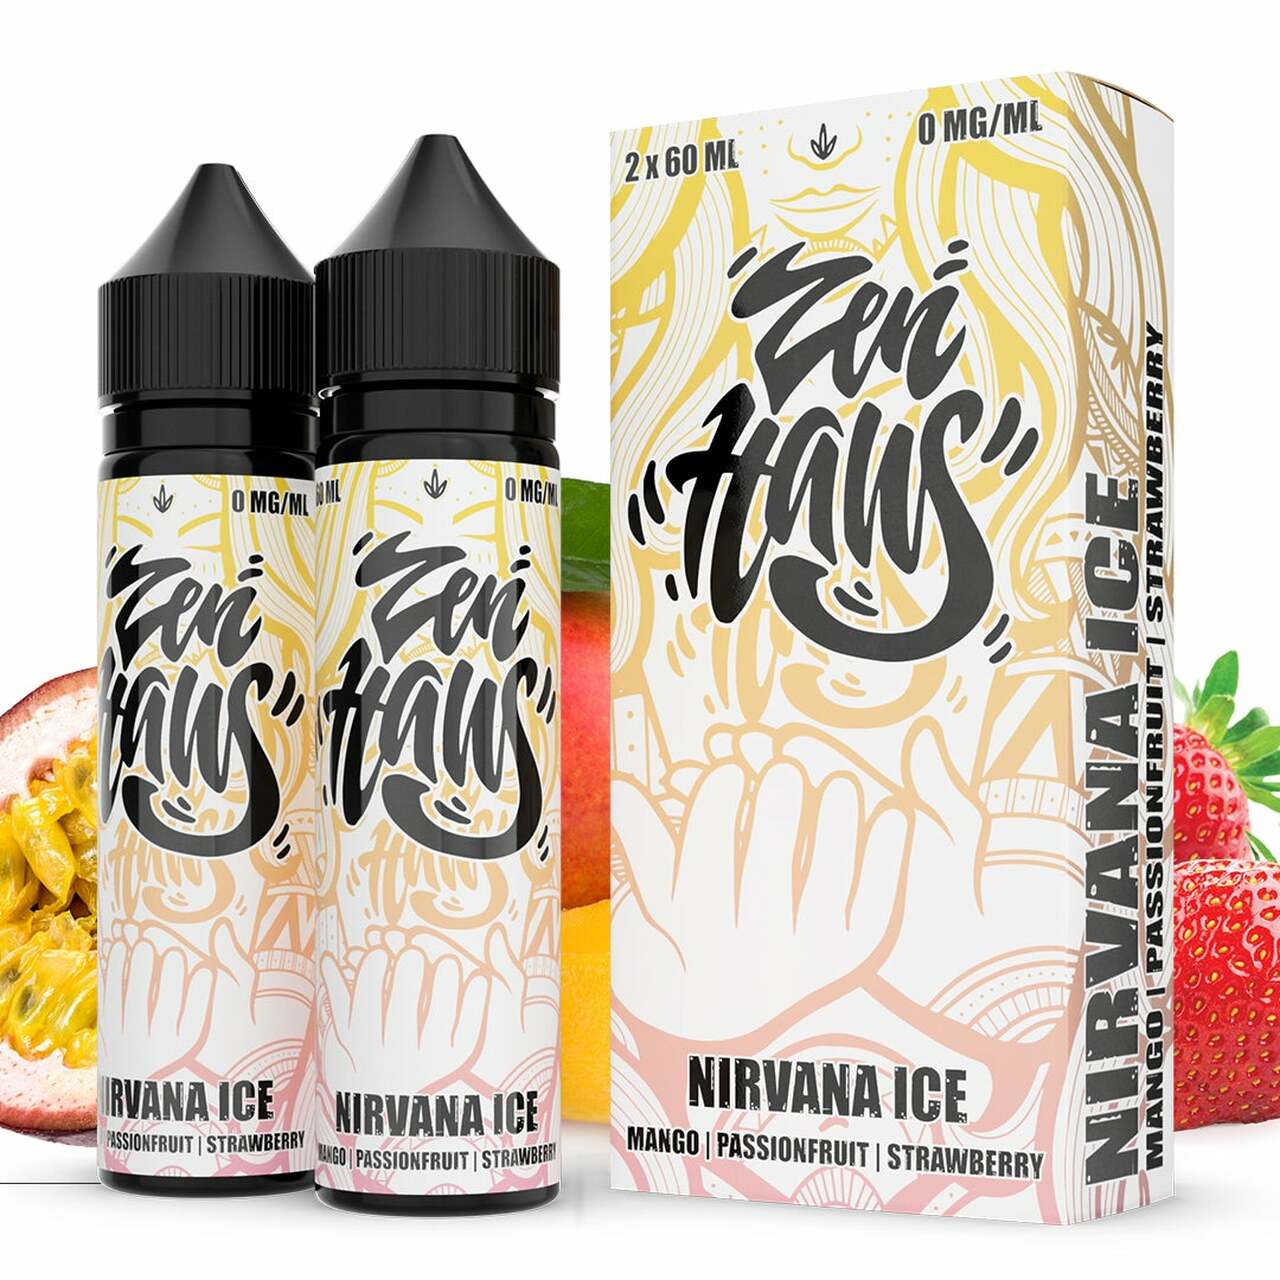 Nirvana ICE by Zen Haus Series 2x60mL with Packaging